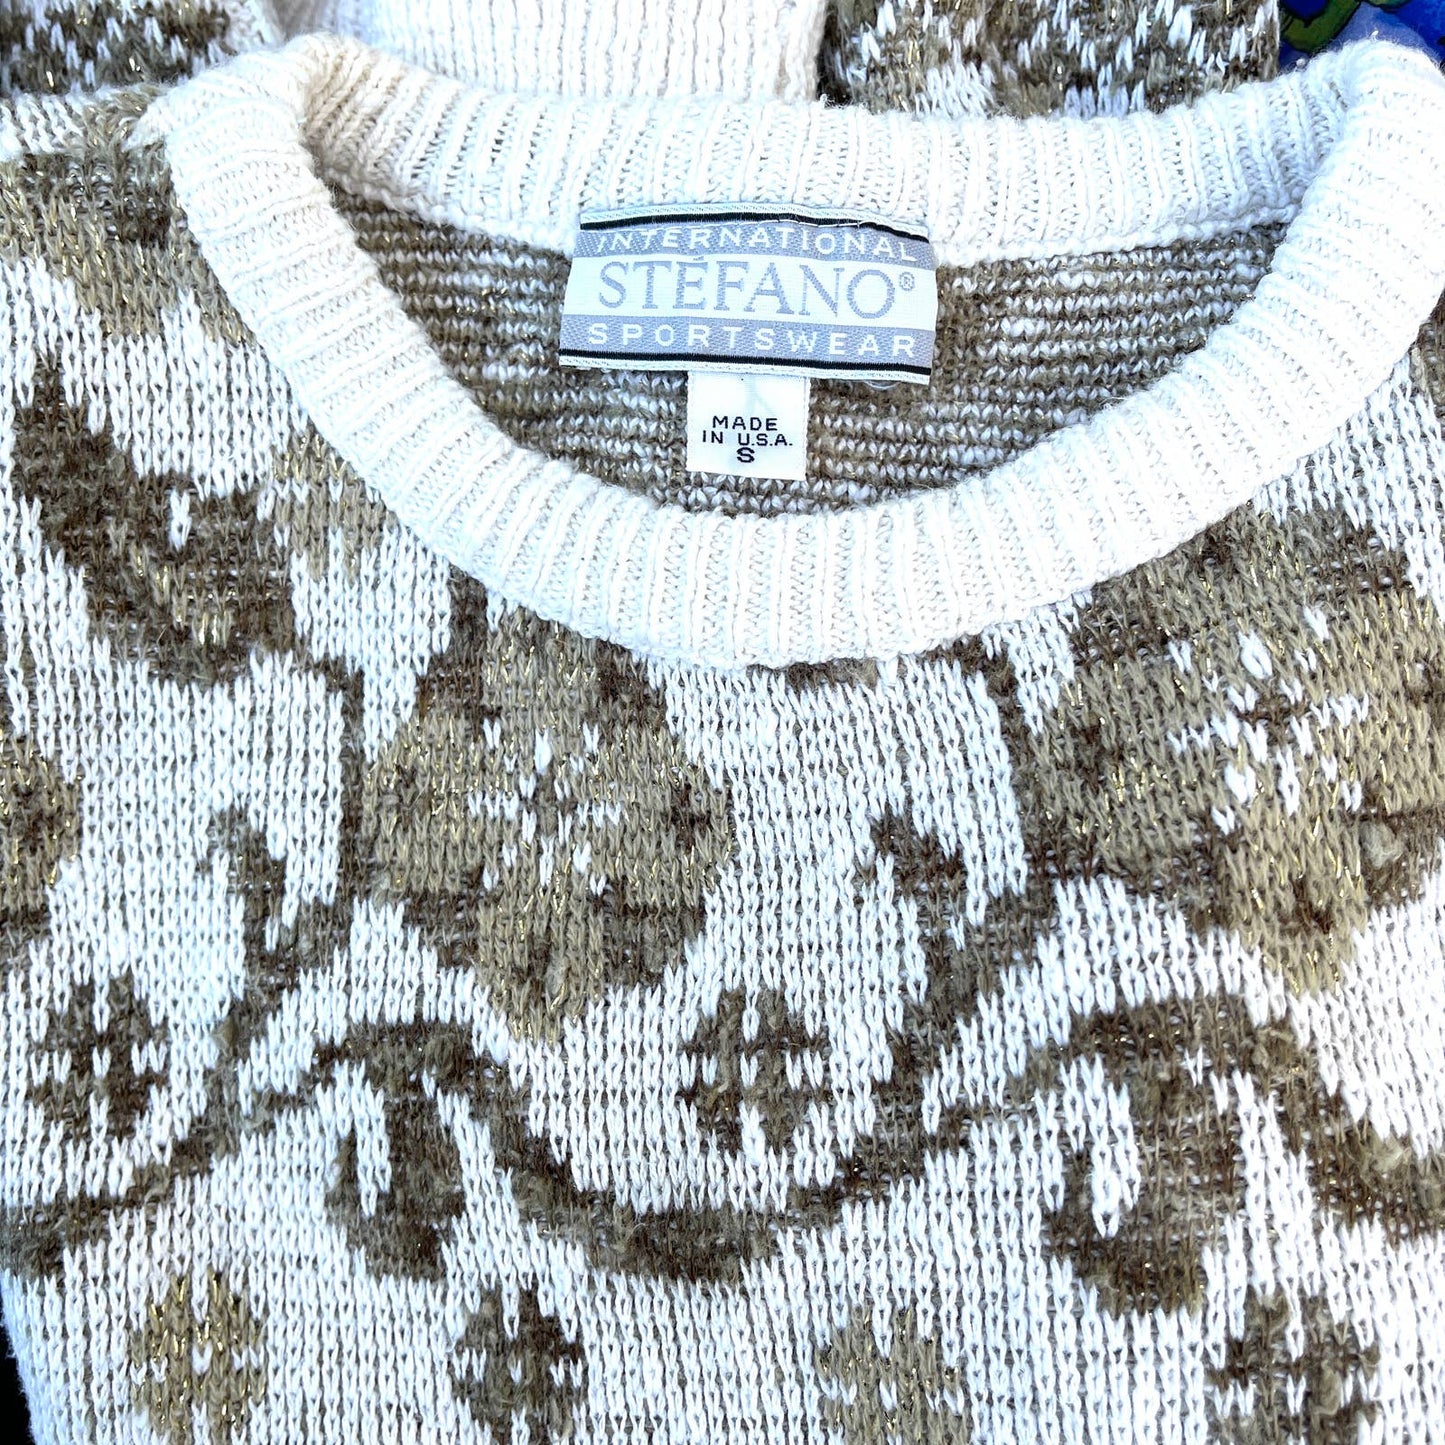 Vintage 80s Cream and Gold Floral Geometric Sweater Metallic by Stefano Size S